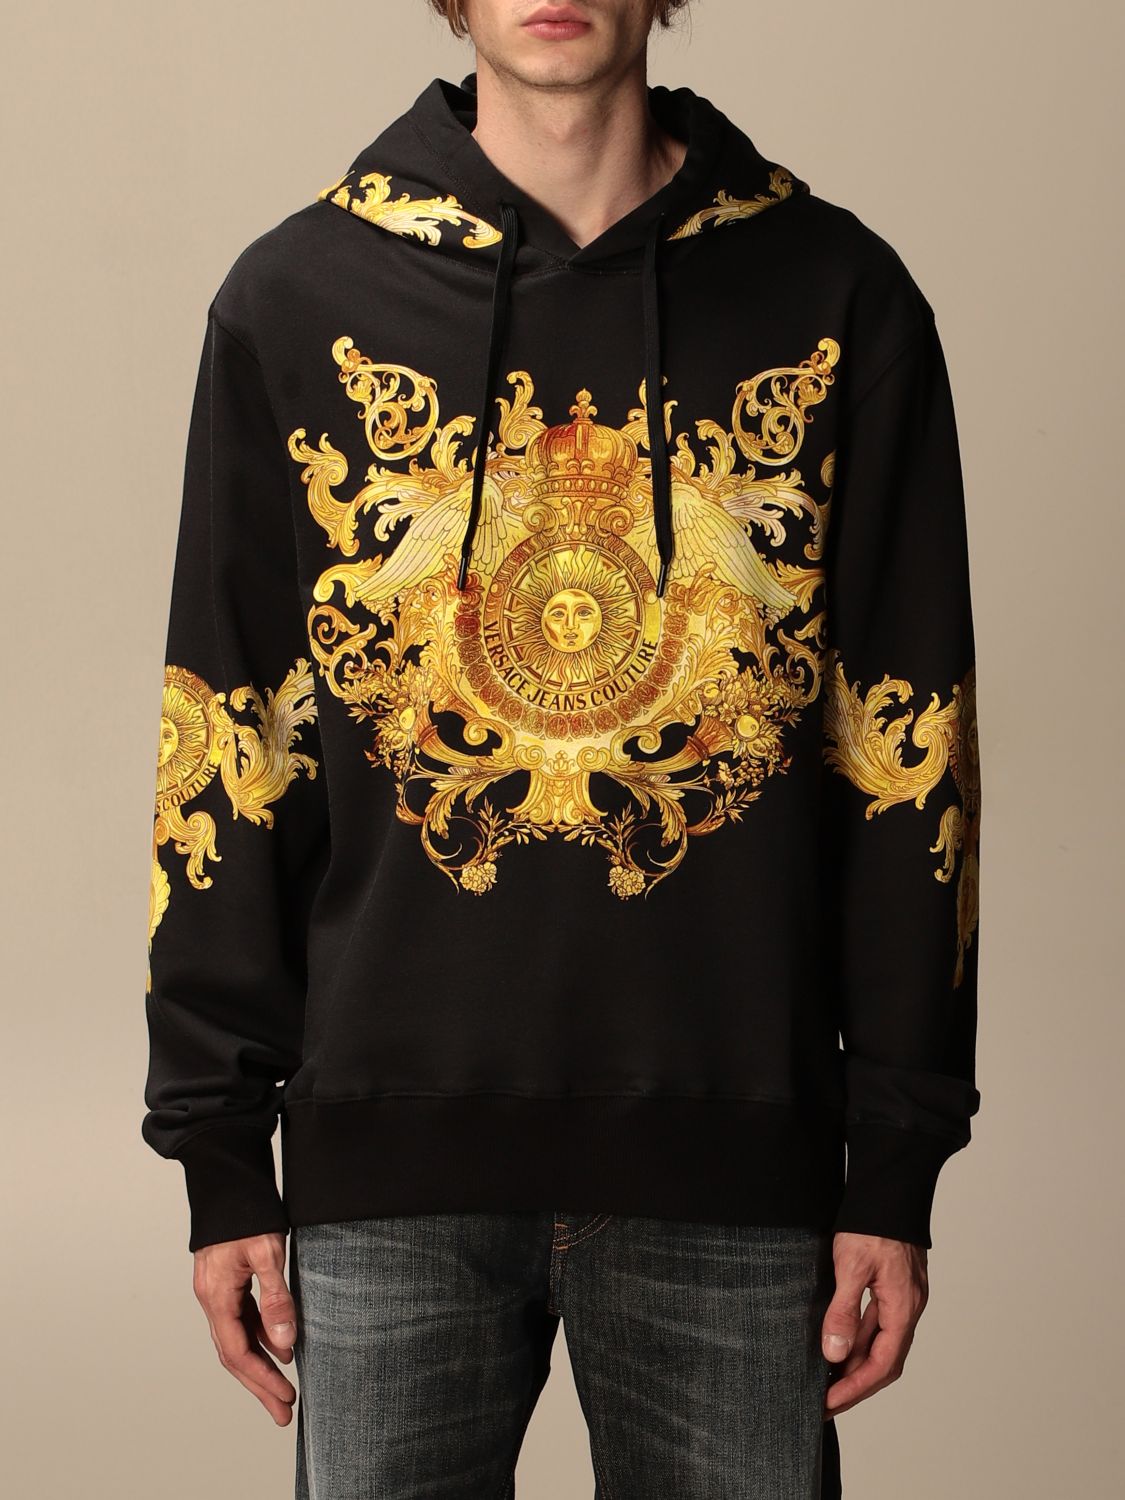 VERSACE JEANS COUTURE: hoodie - Black | Versace Jeans Couture sweatshirt B7GWA7F7S0276 at GIGLIO.COM